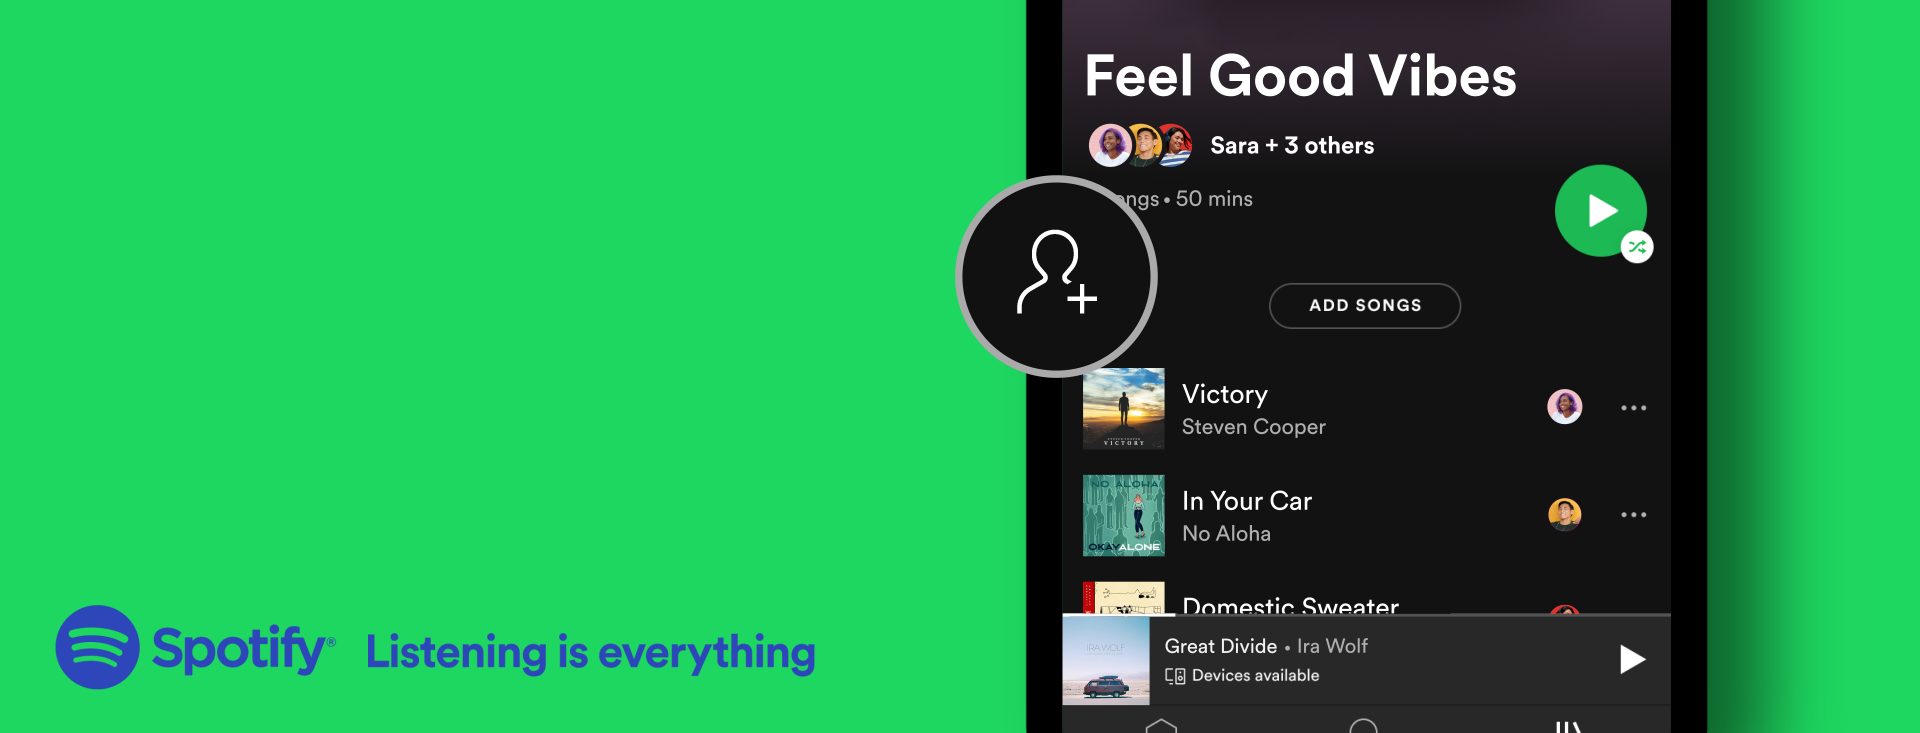 Social interaction on spotify